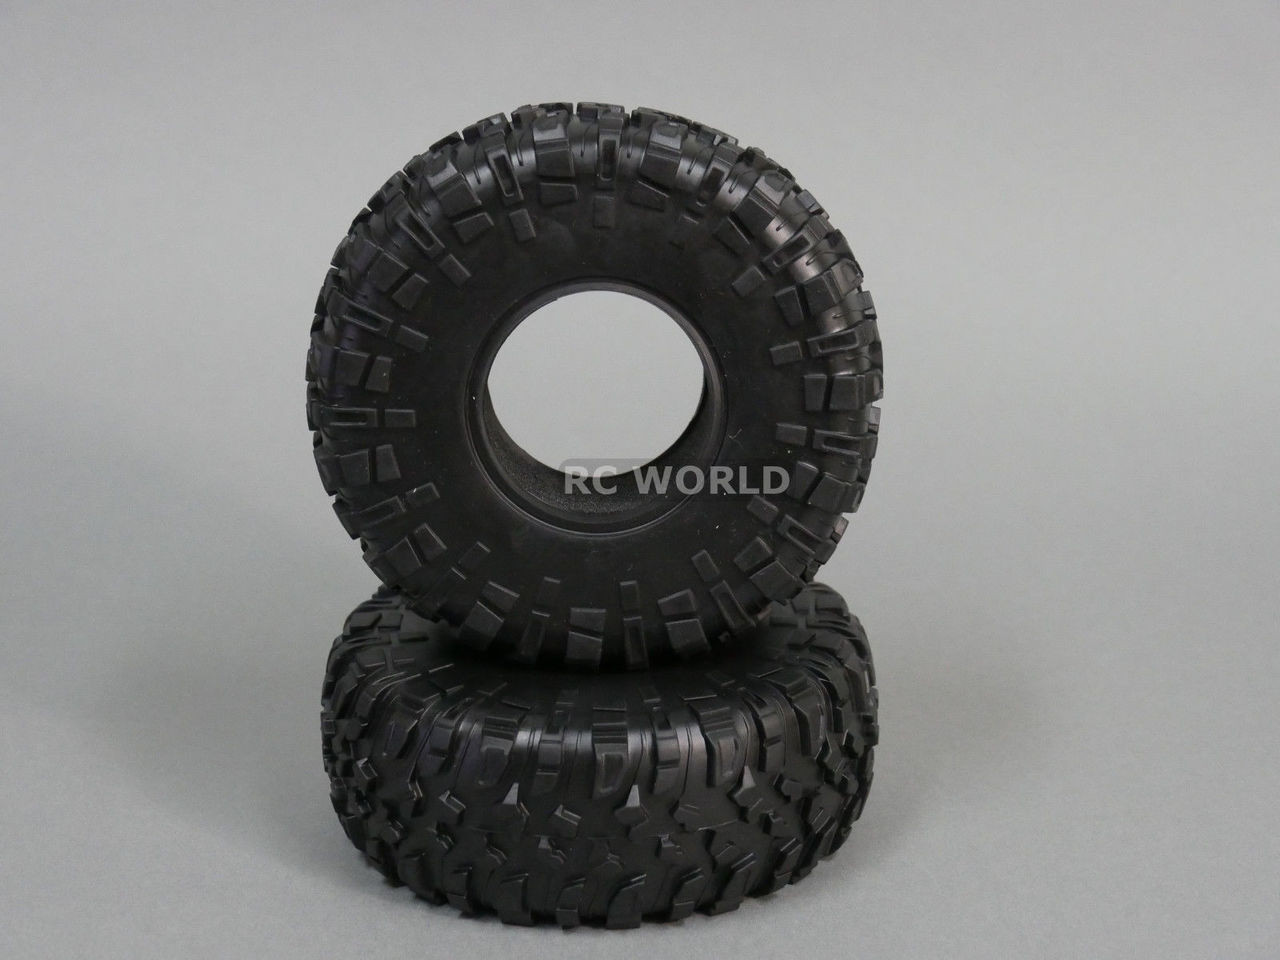 gm70294 Gmade RC 1/10 Rubber TRUCK Tires 2.2 Off Road Tire MT2201 135mm 2pcs 